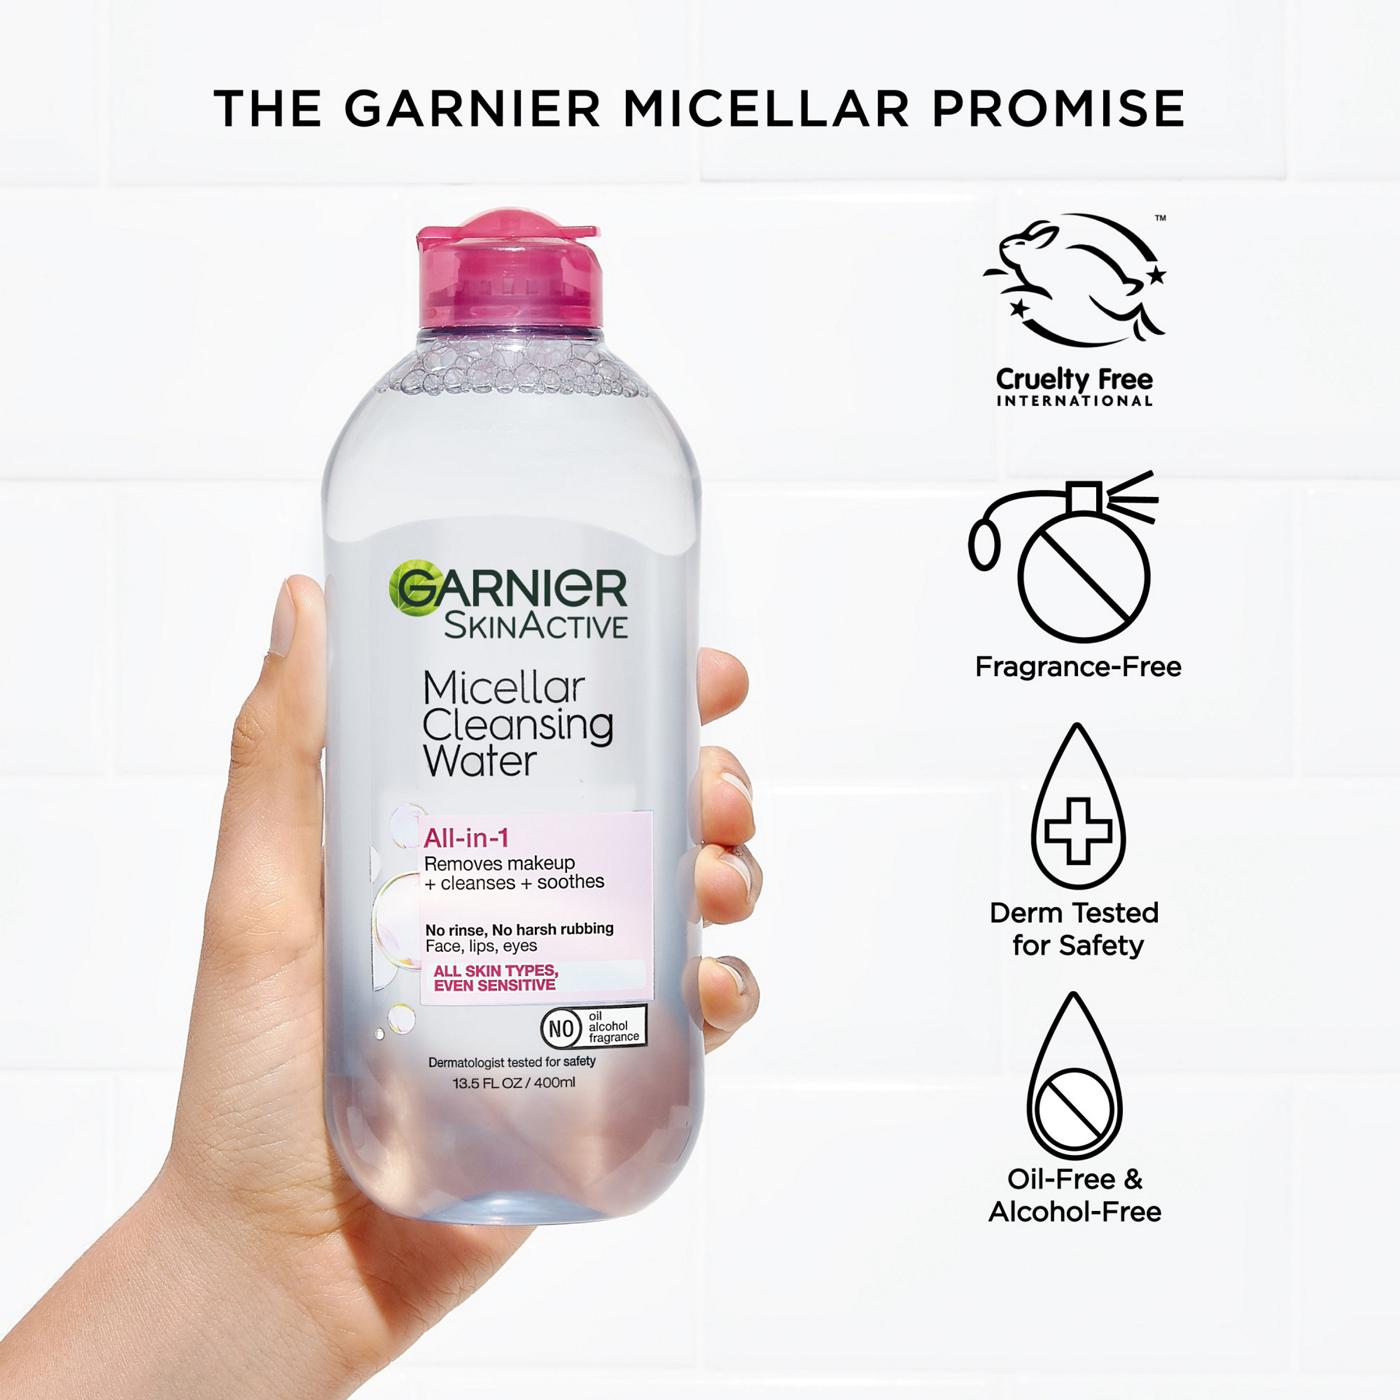 Garnier SkinActive Micellar Cleansing Water, For All Skin Types; image 2 of 11